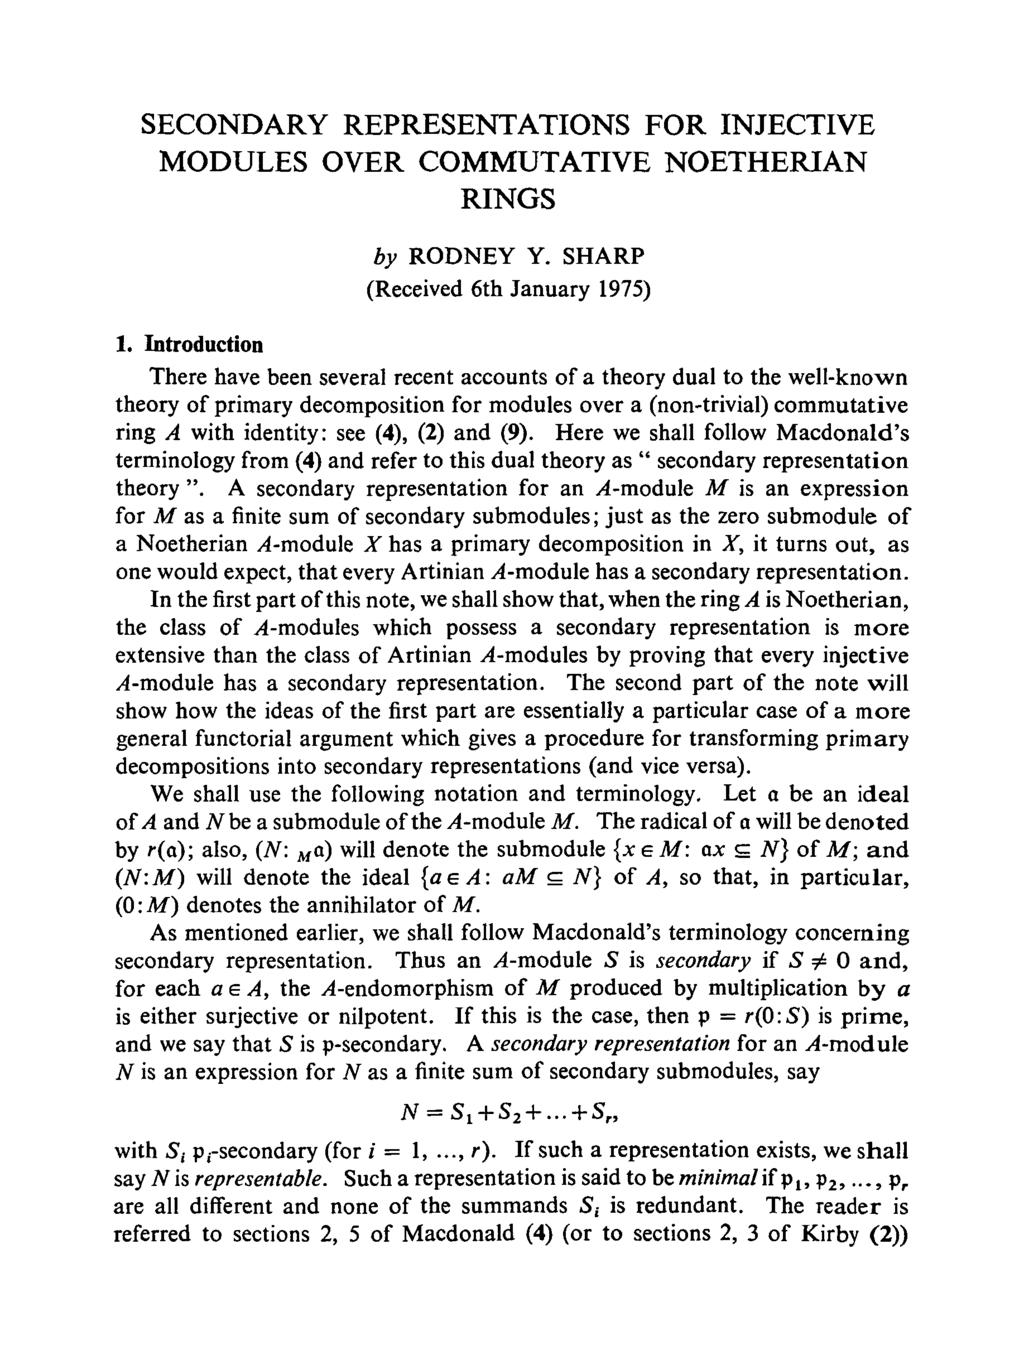 SECONDARY REPRESENTATIONS FOR INJECTIVE MODULES OVER COMMUTATIVE NOETHERIAN RINGS by RODNEY Y. SHARP (Received 6th January 1975) 1.